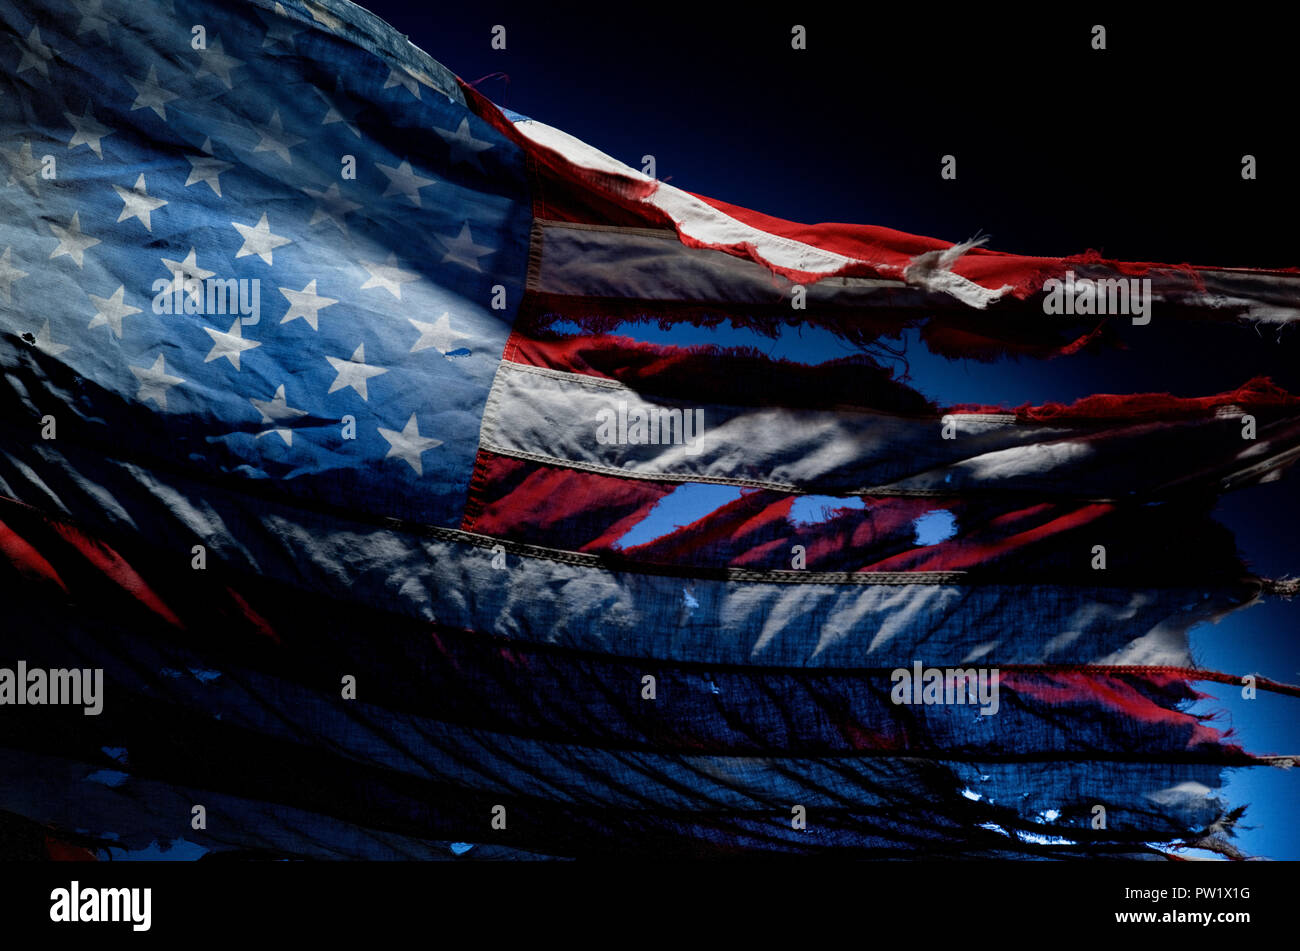 Relic Tattered American Flag, Ripped, Vintage, Discolored, Dramatic Lighting, Stars and Stripes Stock Photo